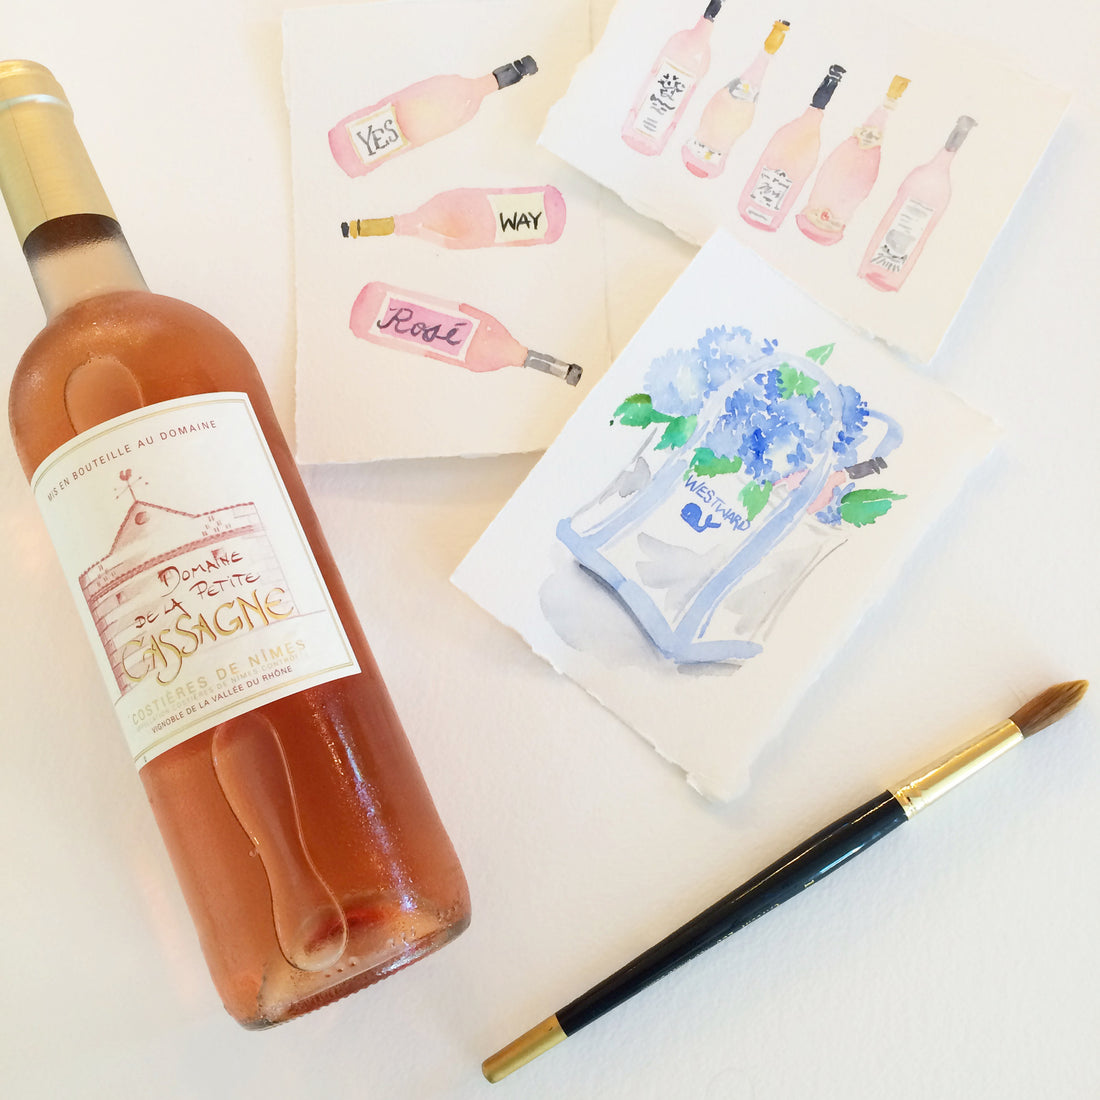 Rosé and Fresh Paint at Watson Kennedy